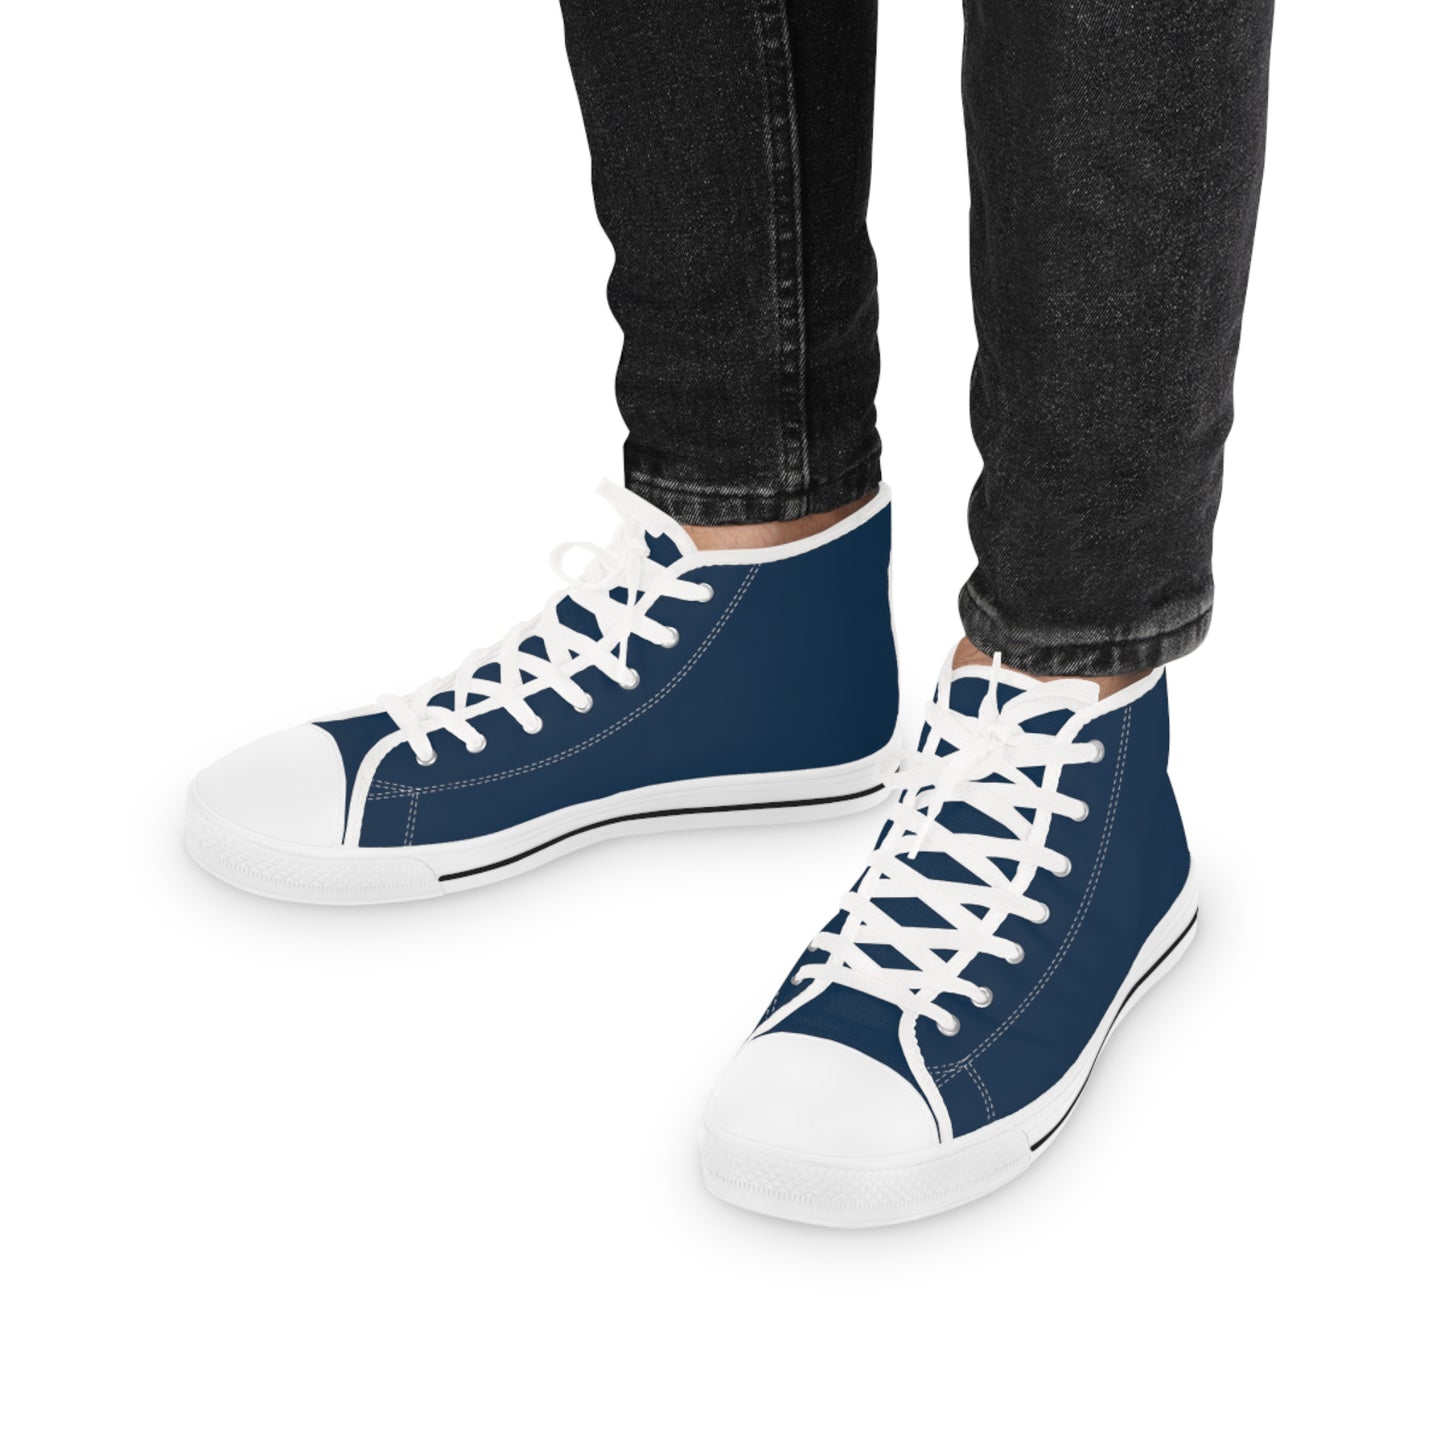 Men's Canvas High Top Solid Color Sneakers - Ink Blue US 14 White sole